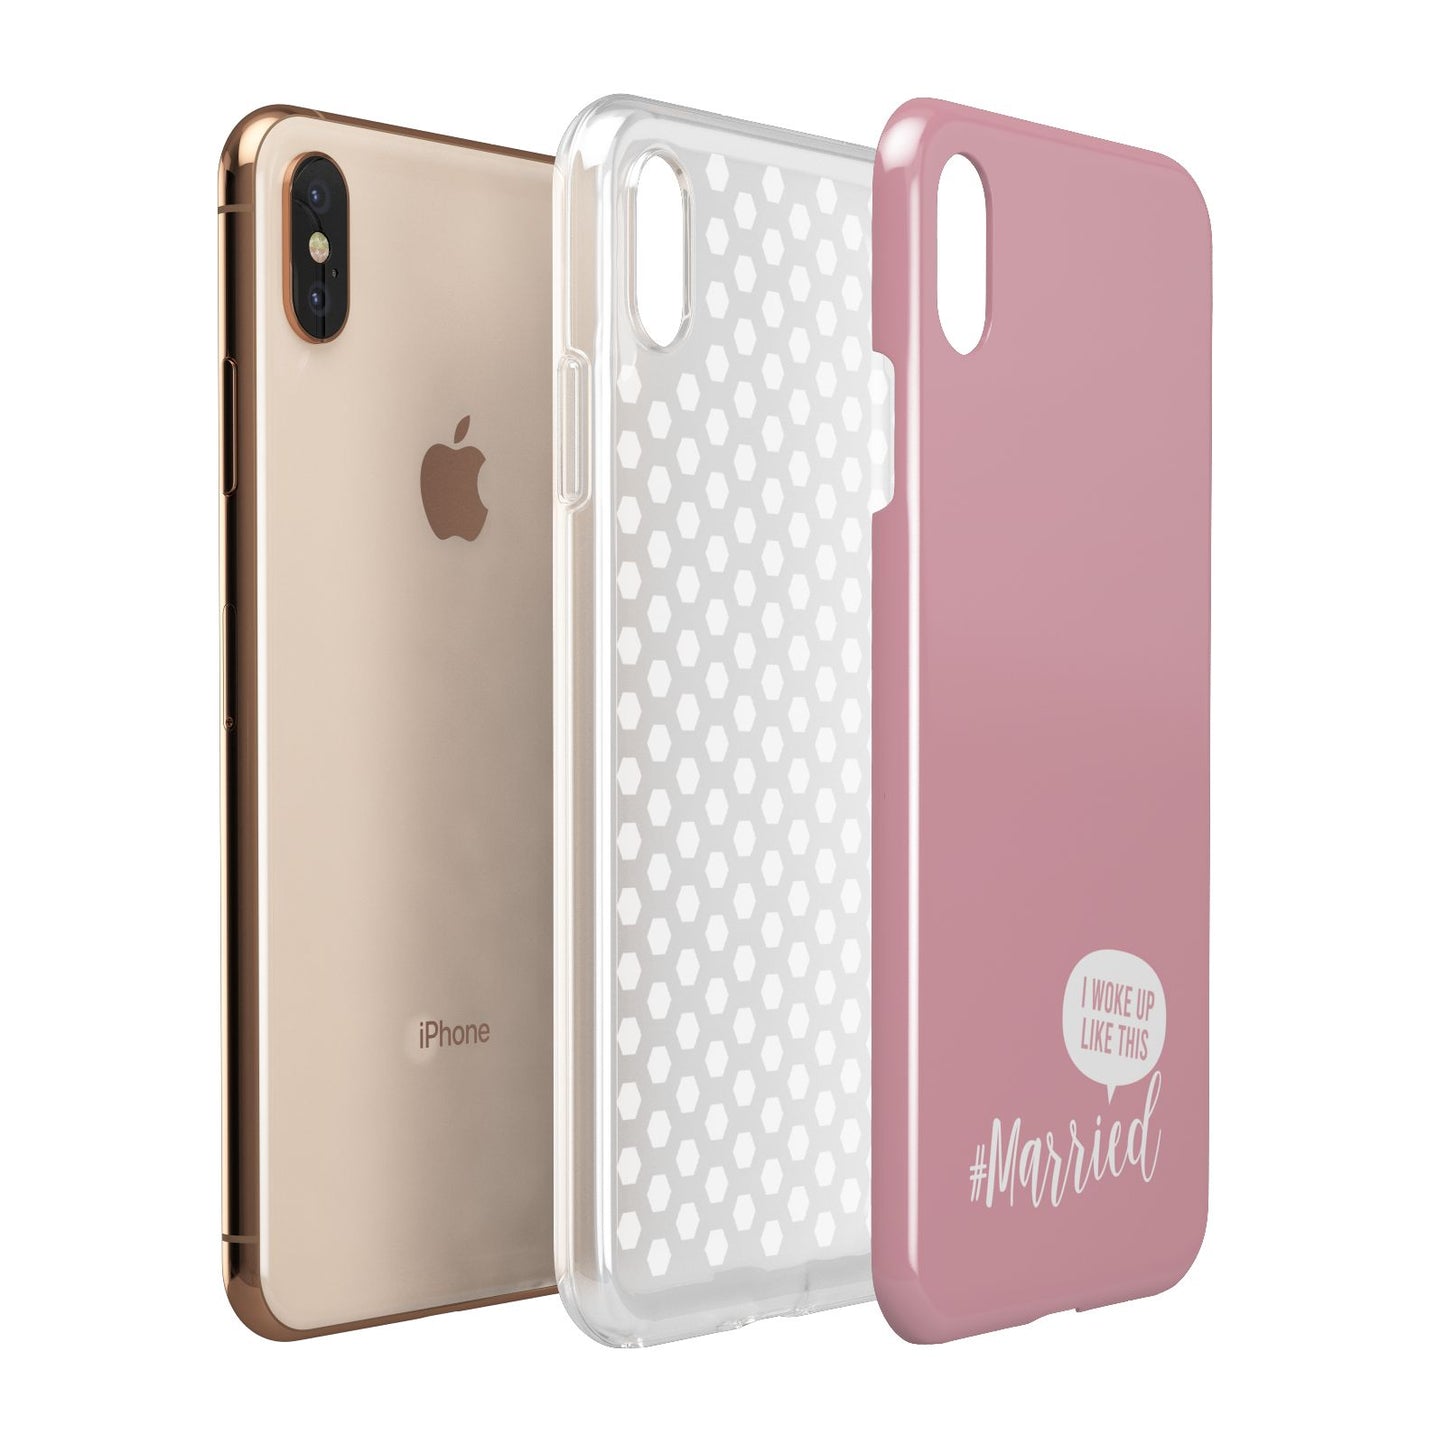 I Woke Up Like This Married Apple iPhone Xs Max 3D Tough Case Expanded View